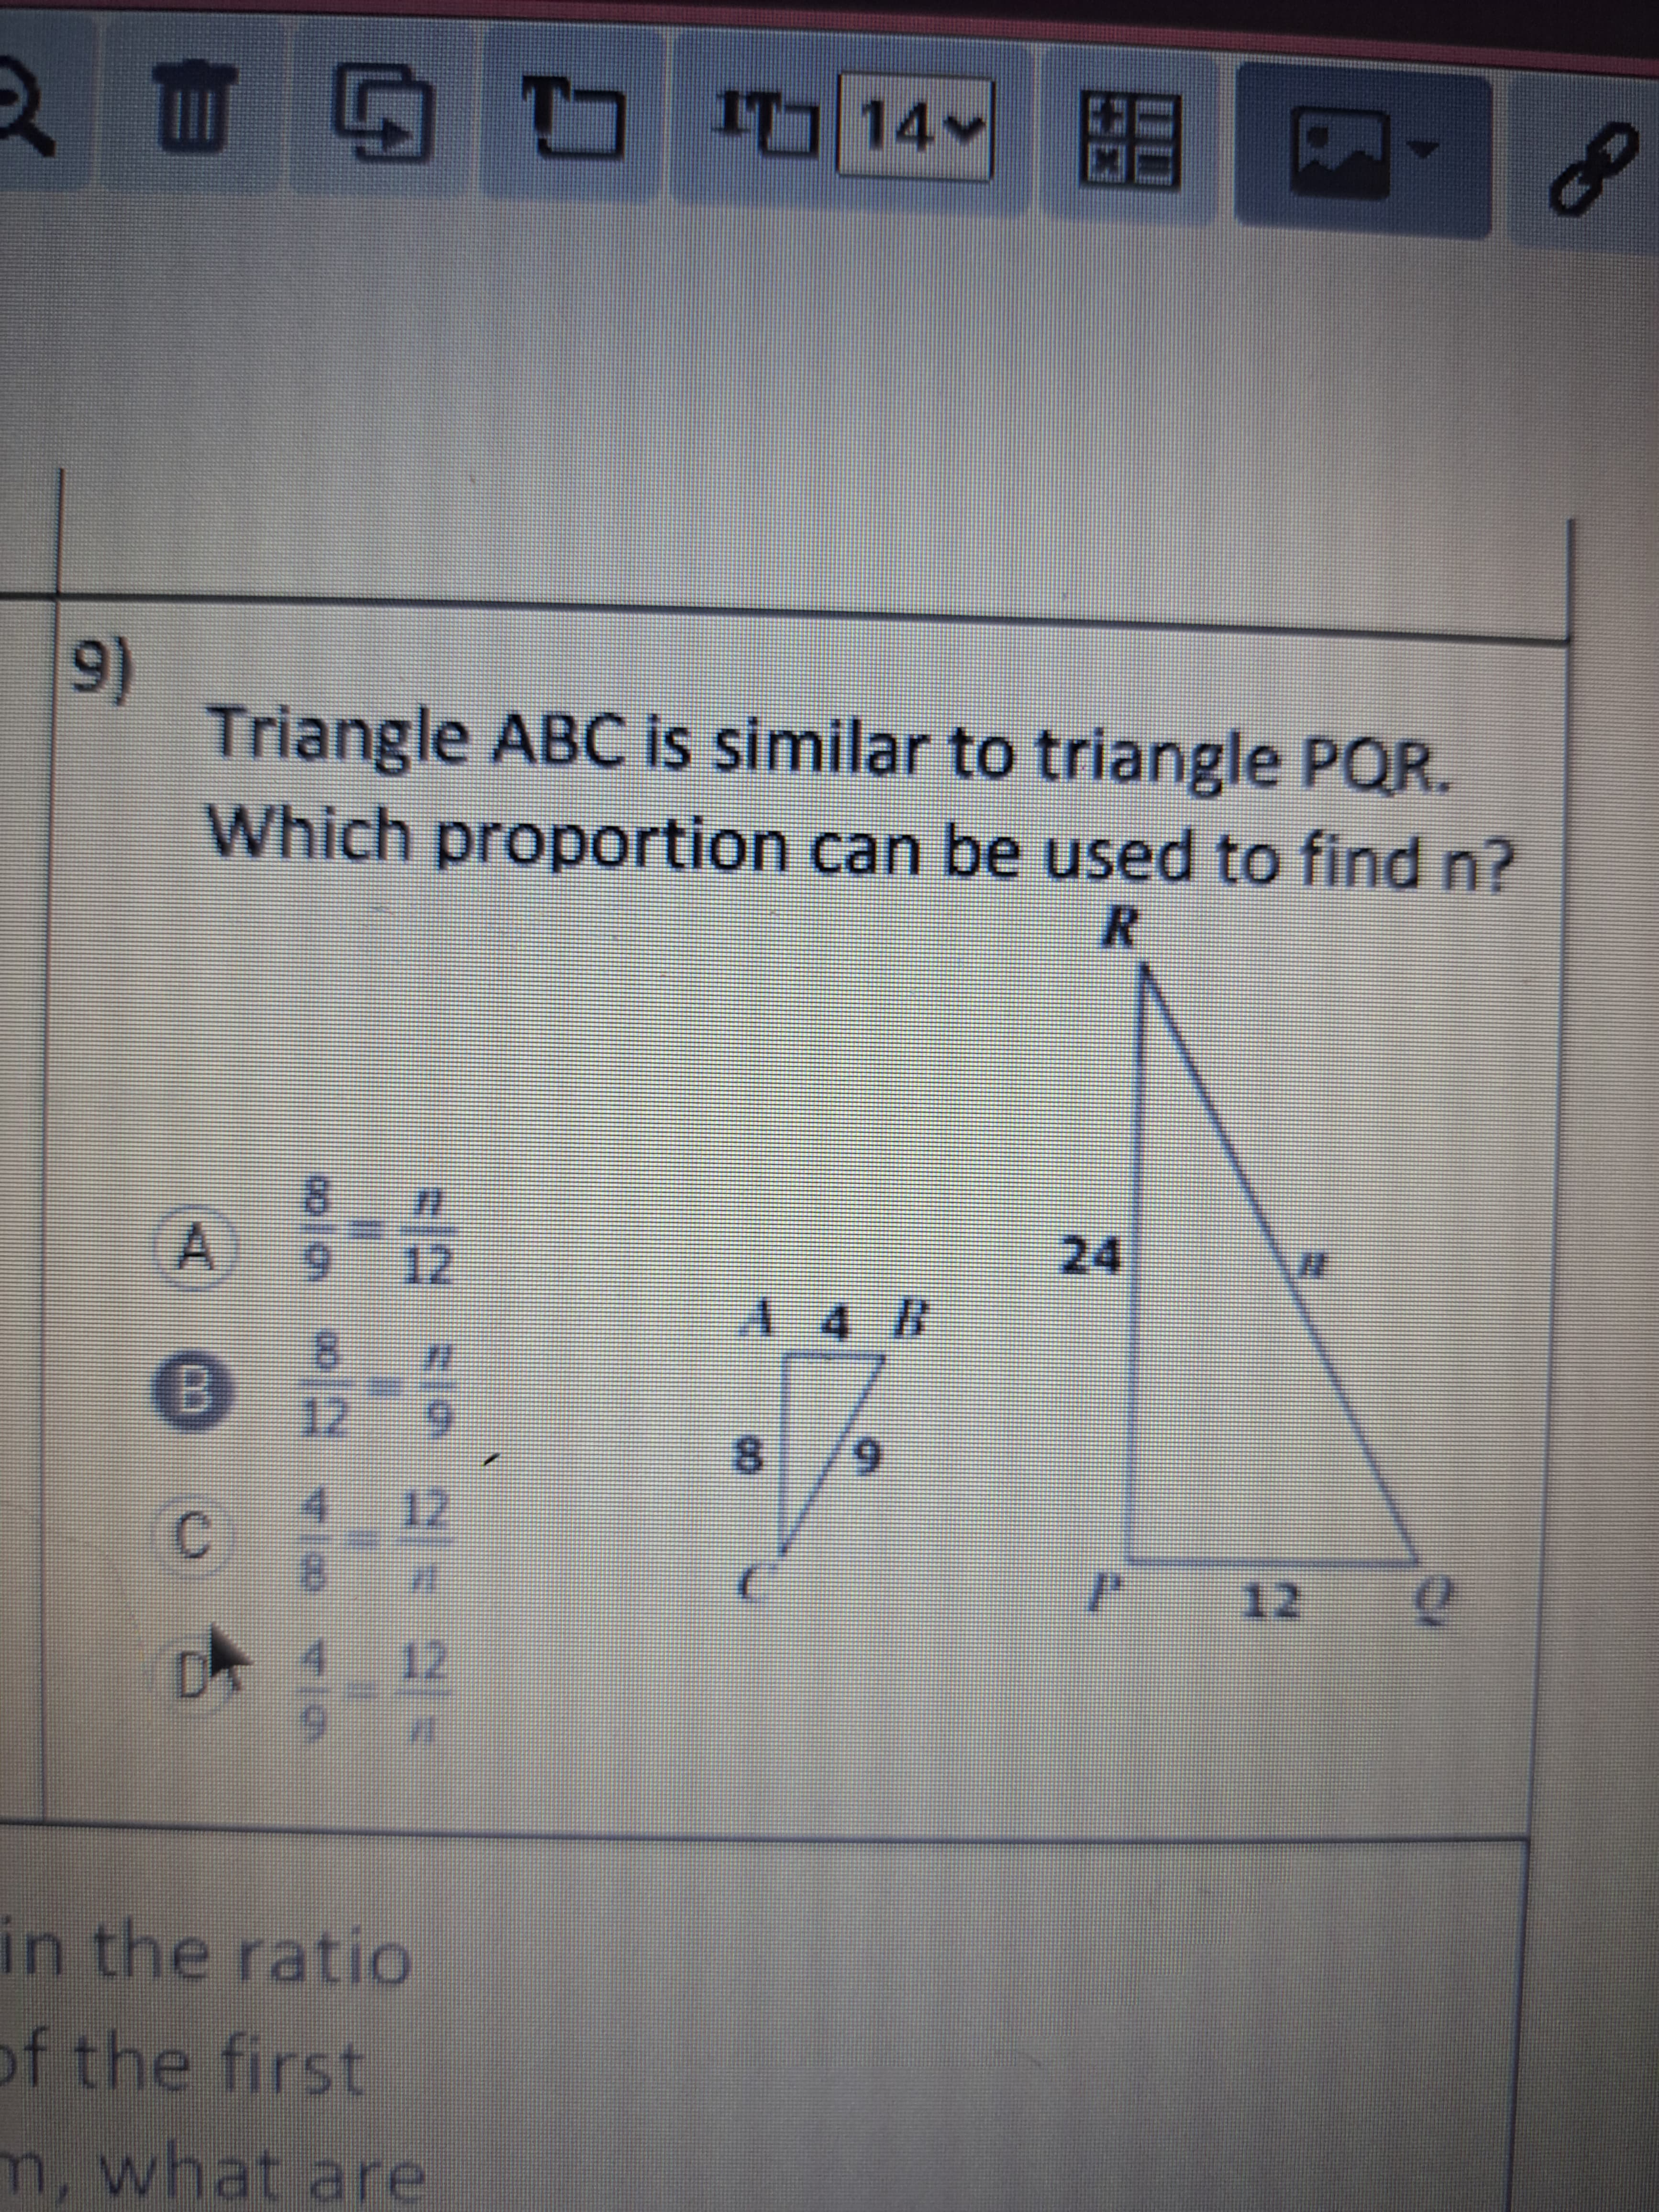 2
9)
3
T
1¹14M
Triangle ABC is similar to triangle PQR.
Which proportion can be used to find n?
N
B
A 9 - 1/12
C
0000240
DA
TO
52 5° 25 25
12
14
in the ratio
of the first
m, what are
A4 B
9
√
2
12 0
##